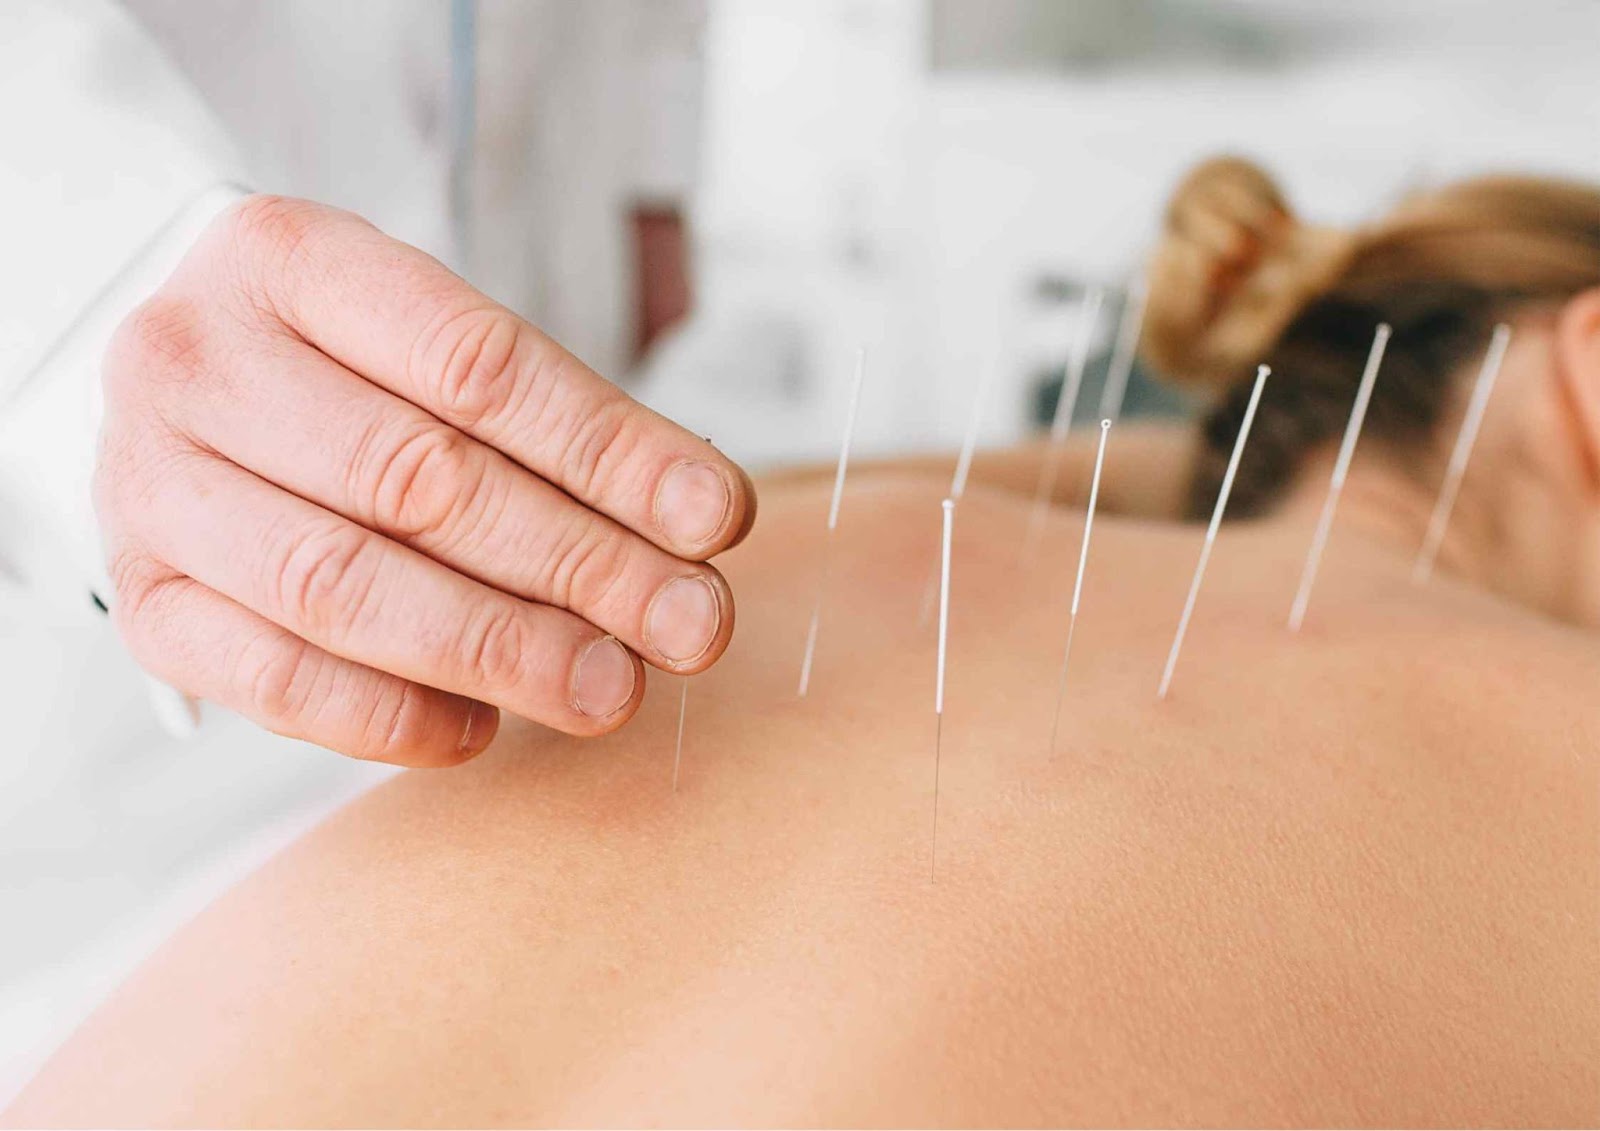 TCM Acupuncture for Eczema in Malaysia